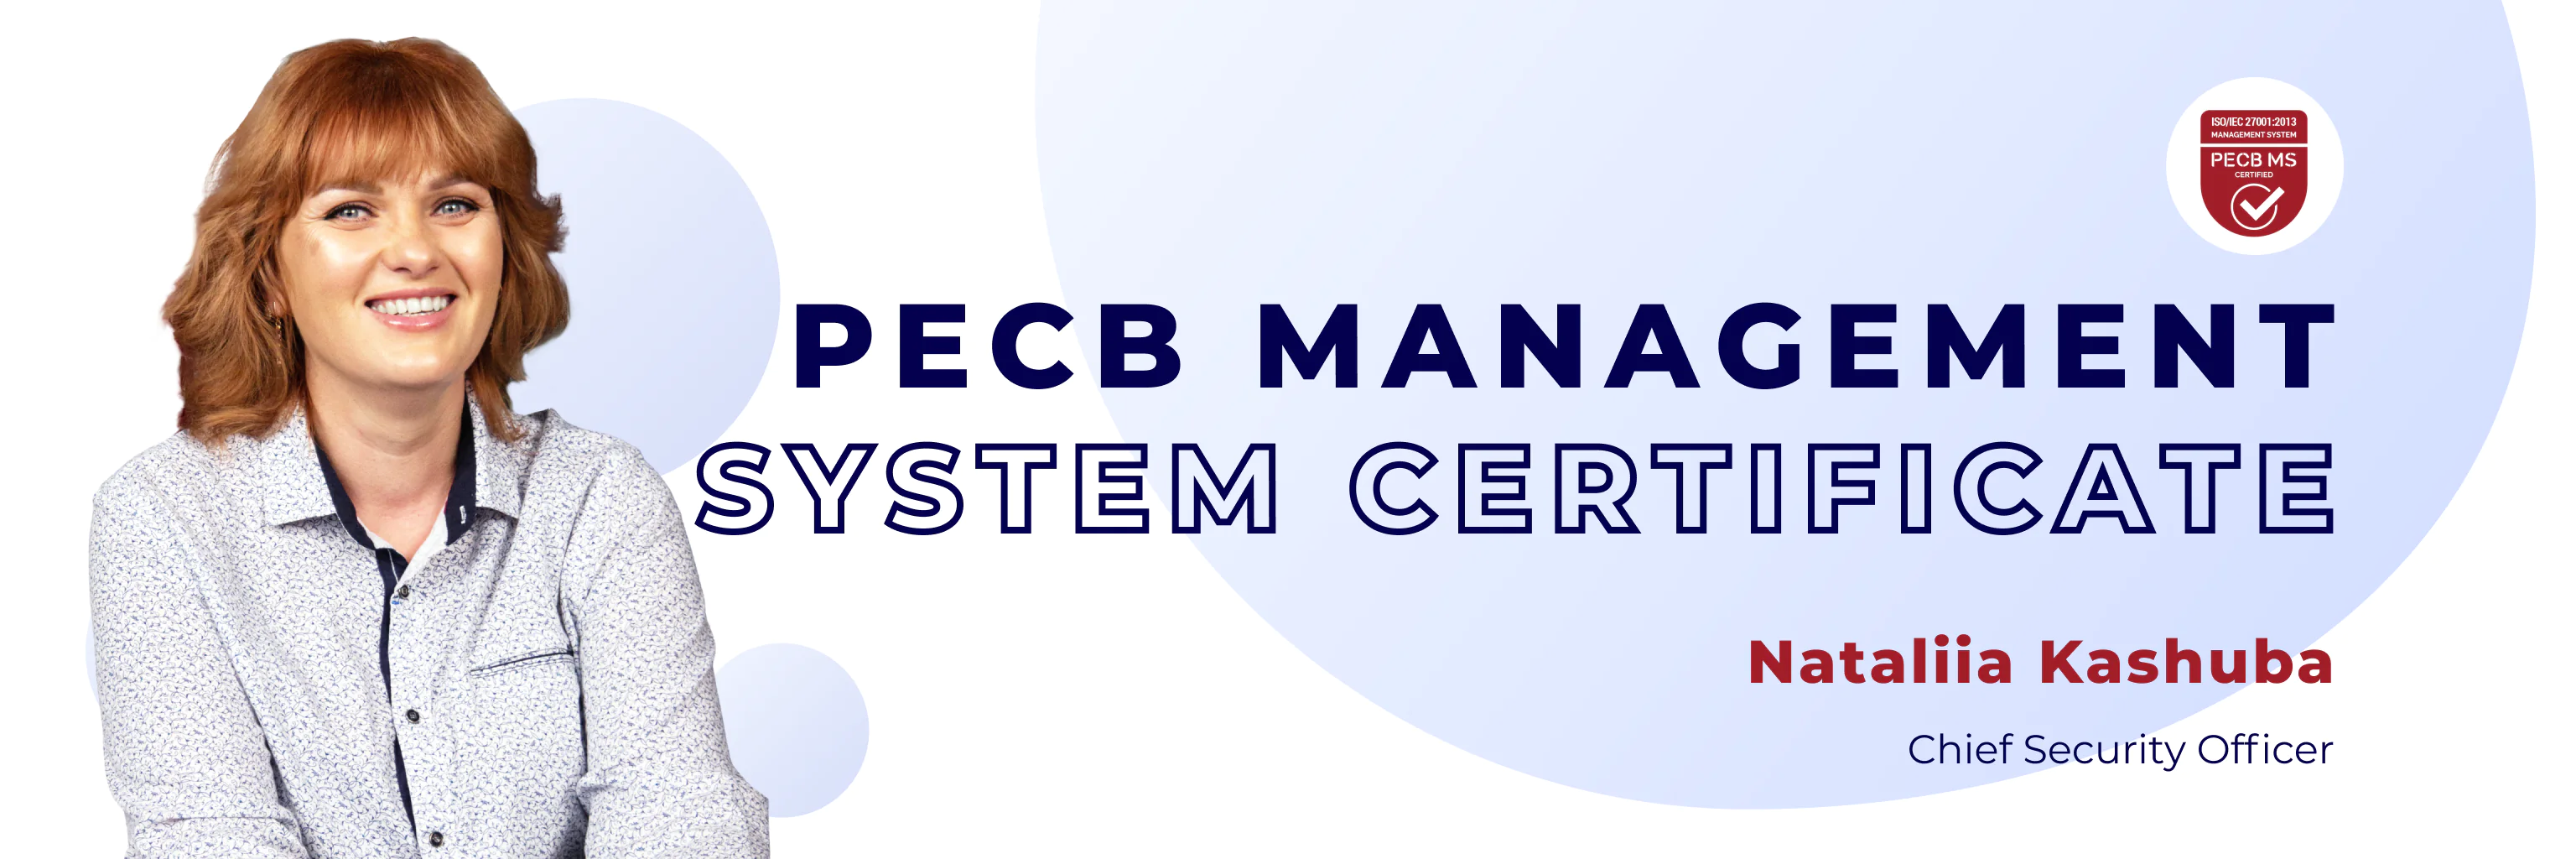 Outsourced software product development company Morebis obtaining ISO/IEC 27001:2013 PECB MS Certificate